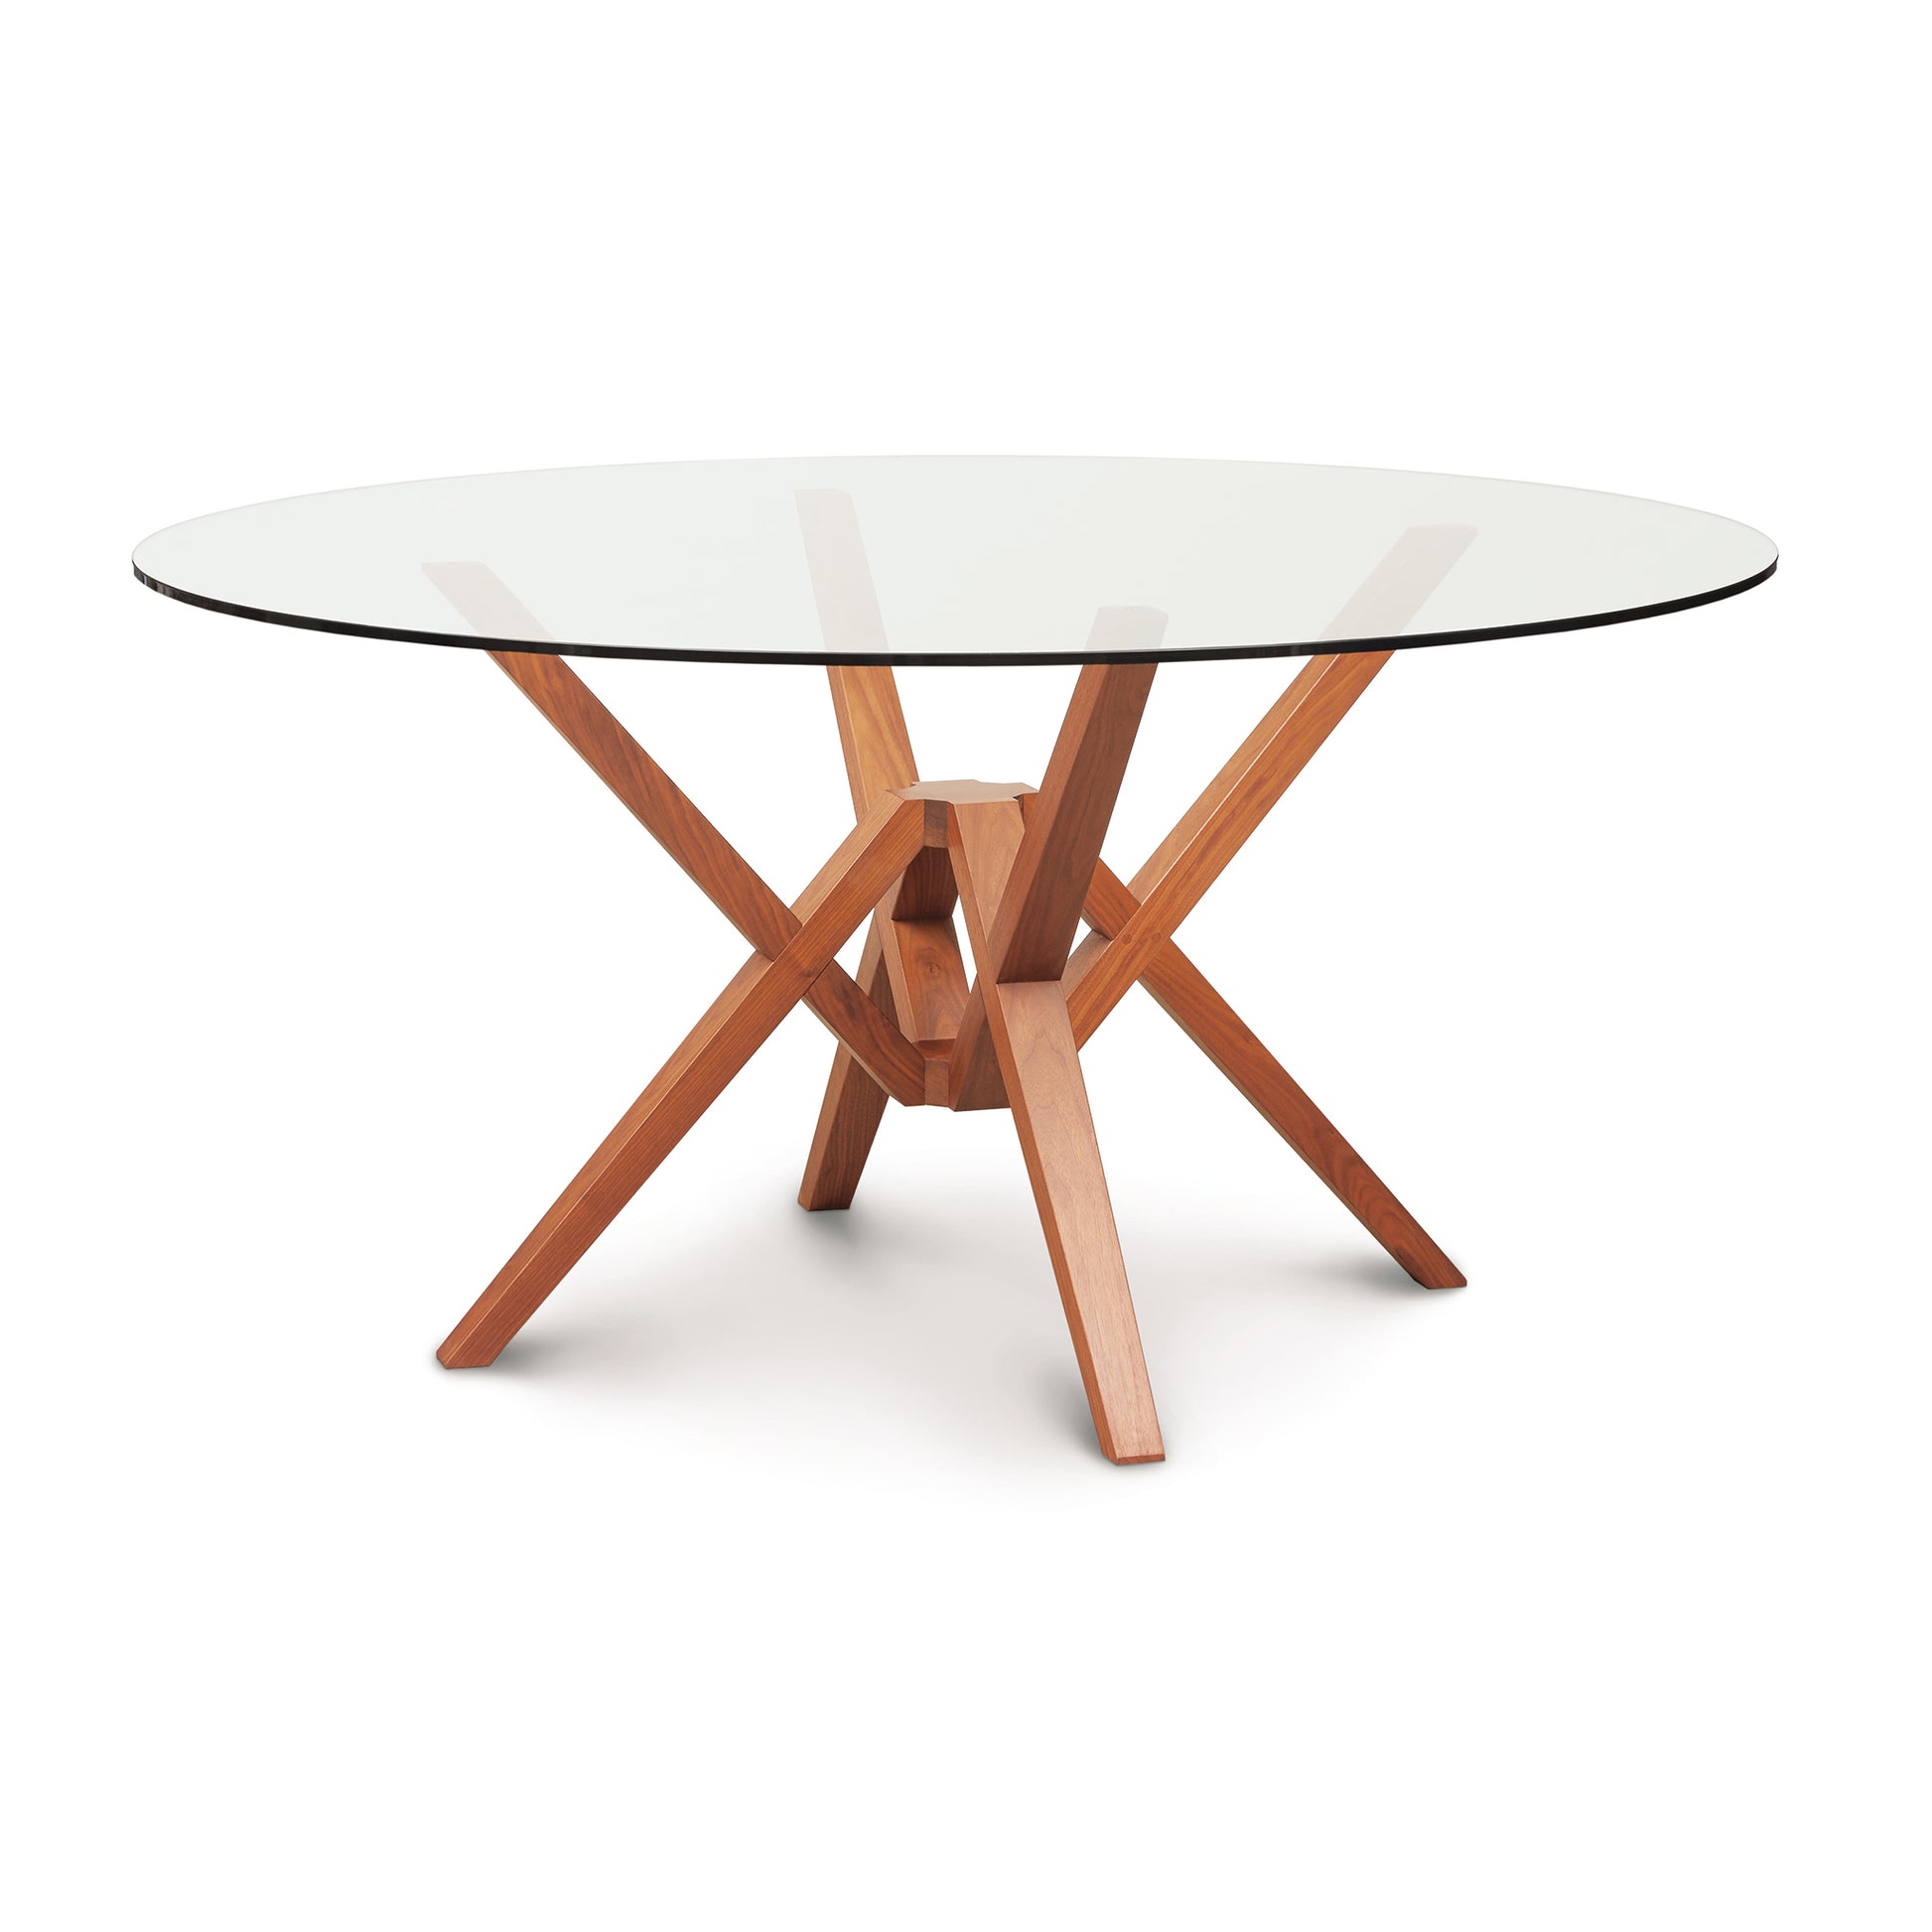 A Copeland Furniture Exeter Round Glass Top Table with wooden legs and innovative engineering.